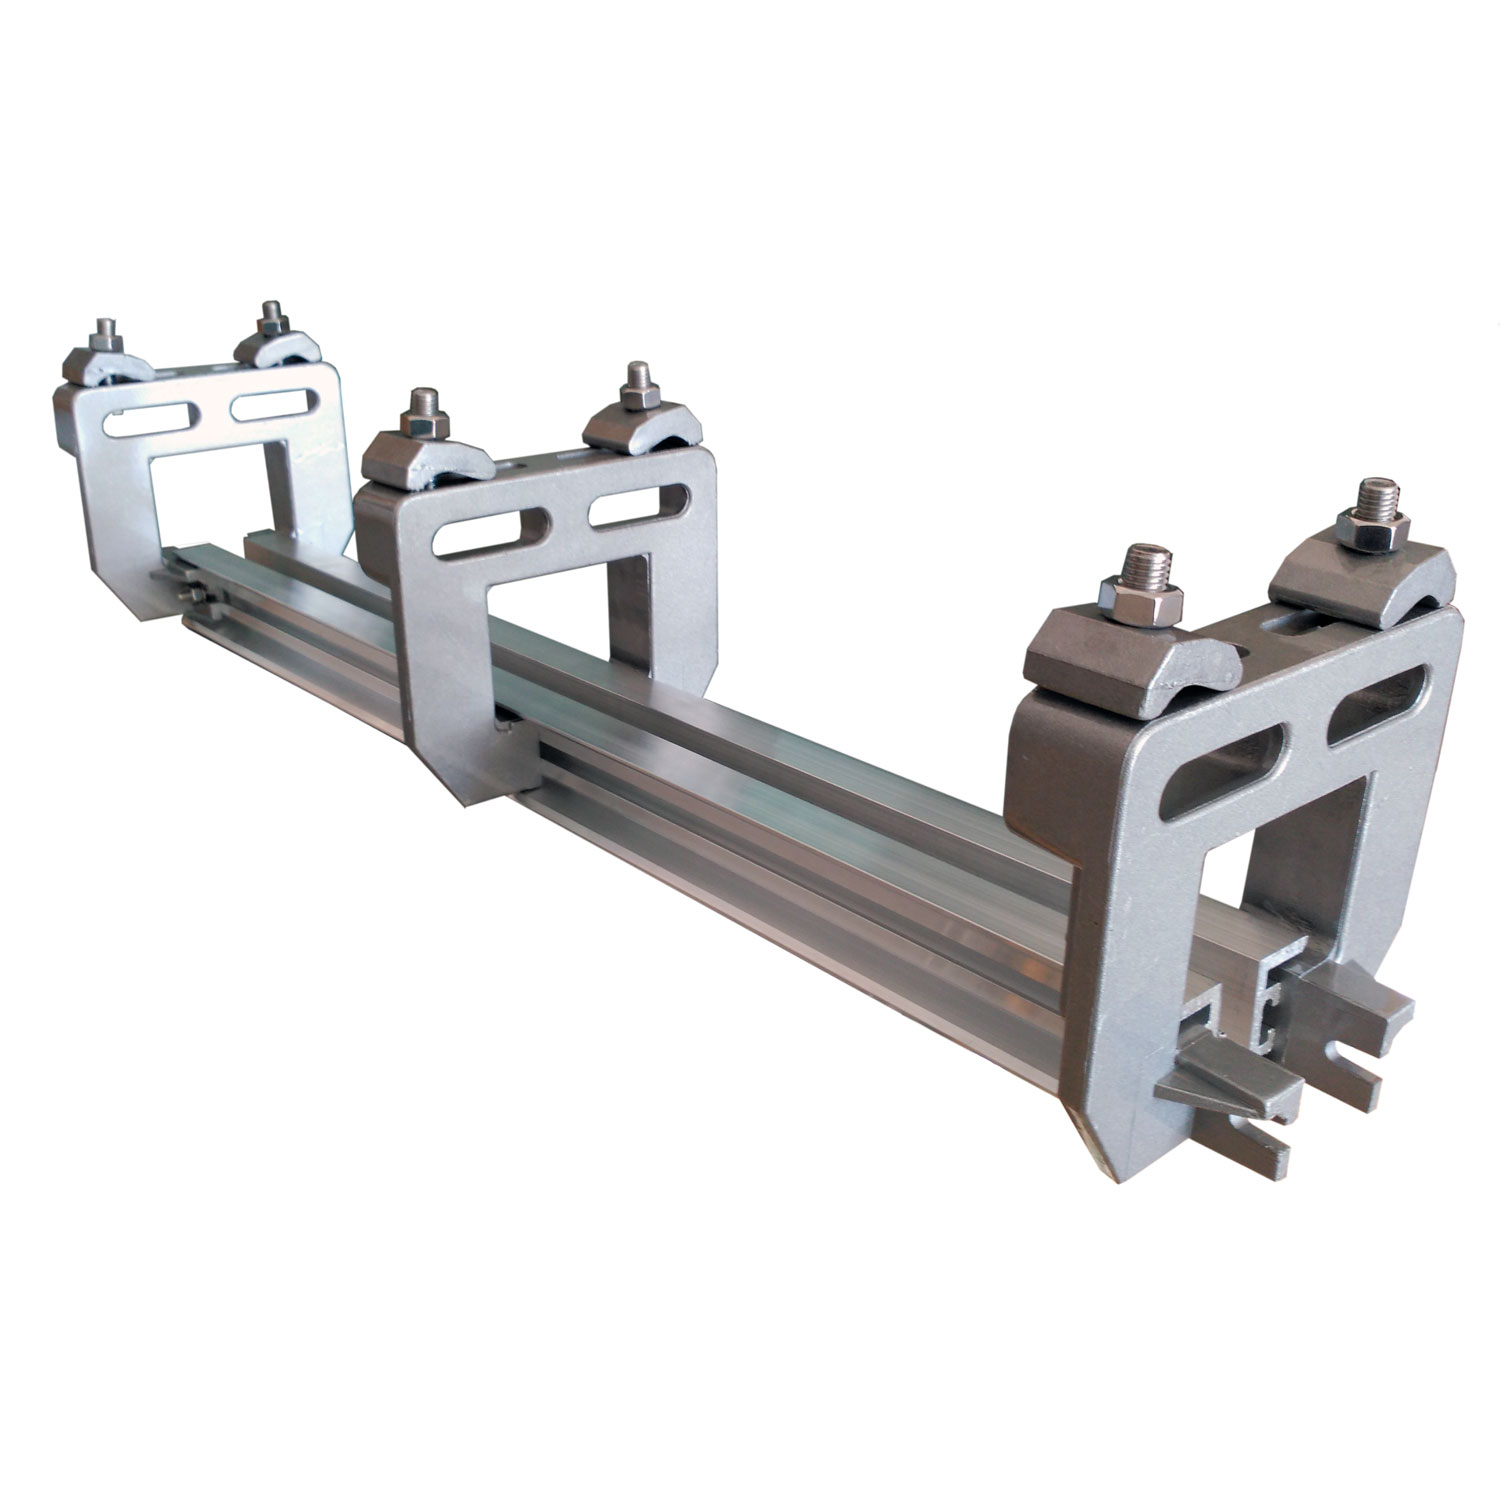 AES Twin Track Rail Per M - Hangers @ 750mm with Fixings • AES Food ...